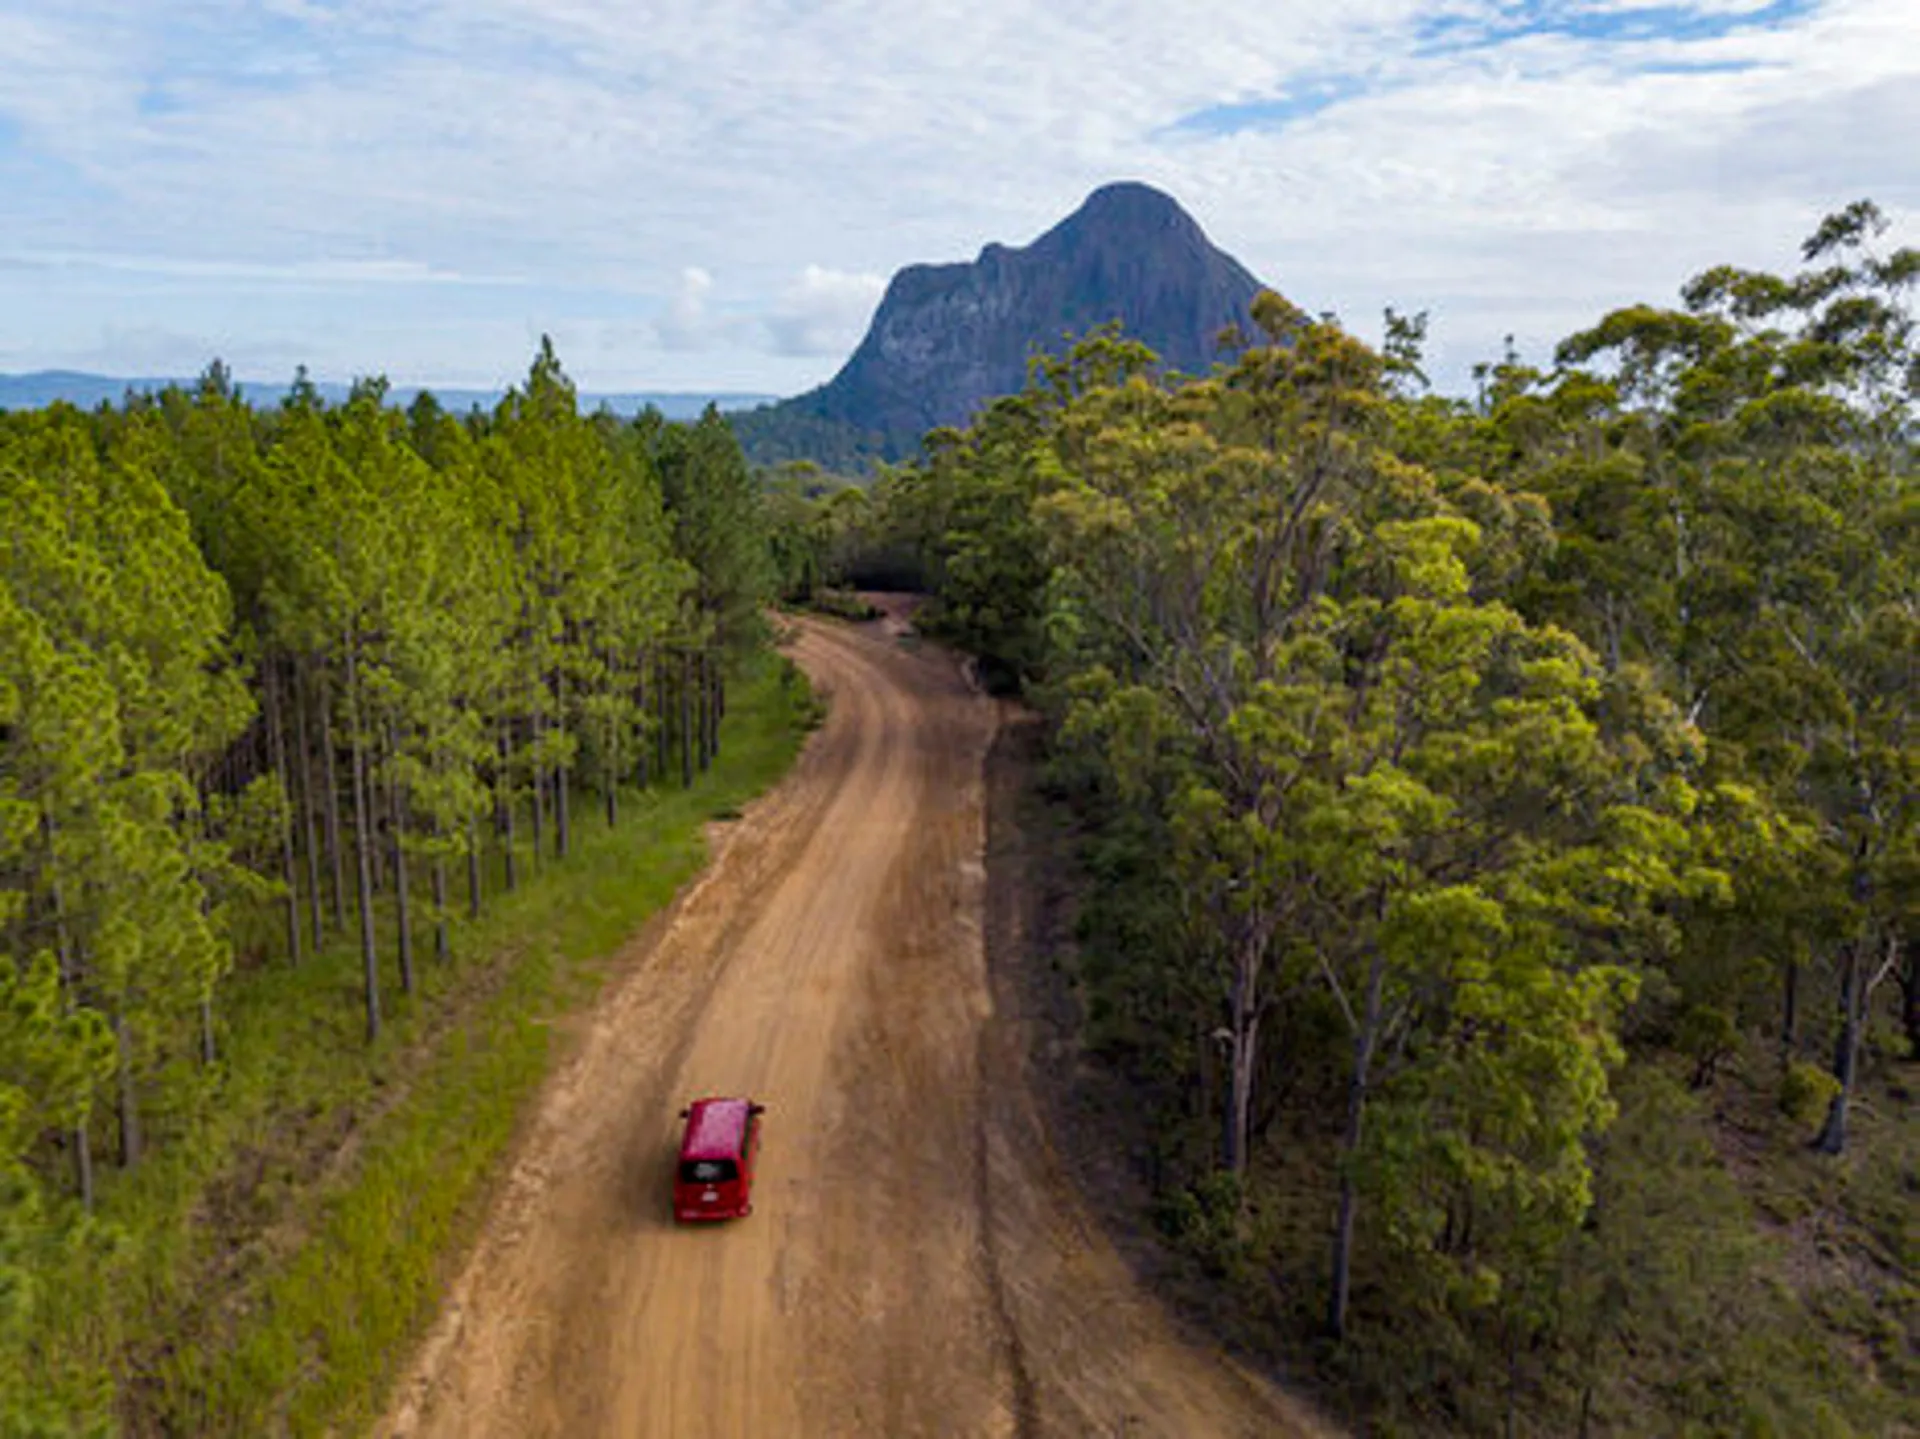 Image shows the tour bus driving on a dirt road with Mt Beerwah in the background